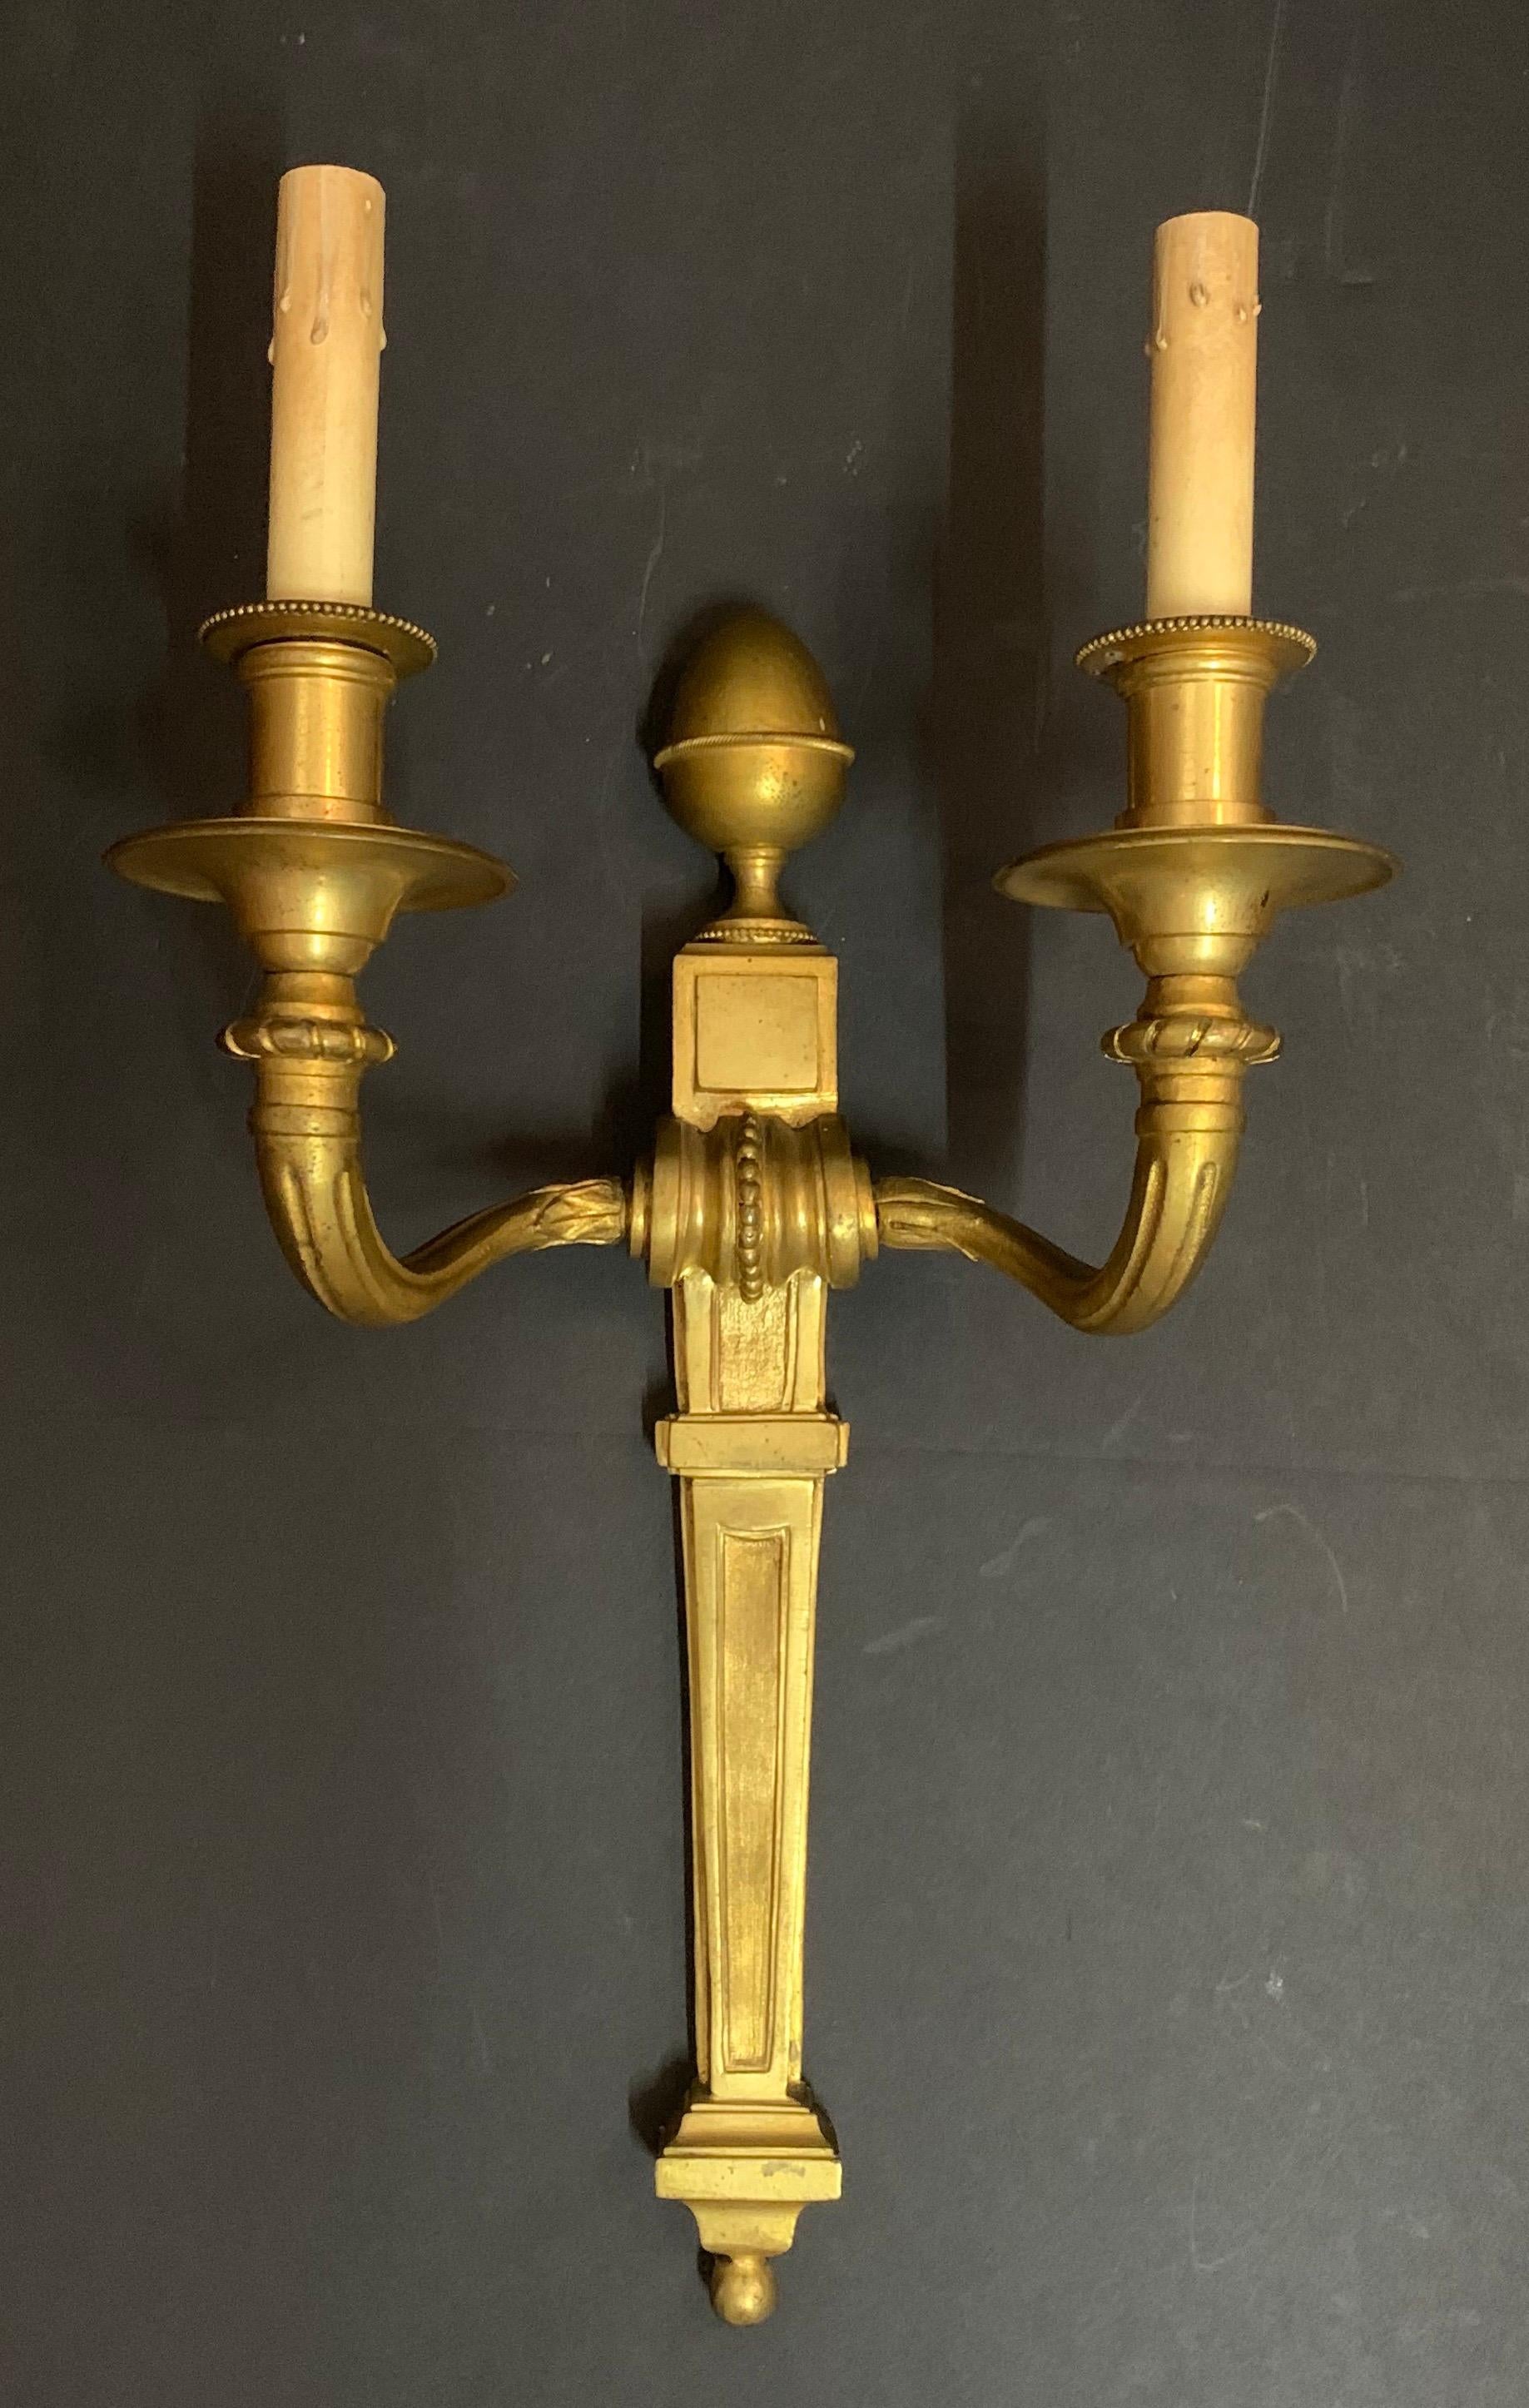 A wonderful set of 4 (two pairs) French bronze Empire / neoclassical urn two candelabra light sconces in the manner of E.F. Caldwell.